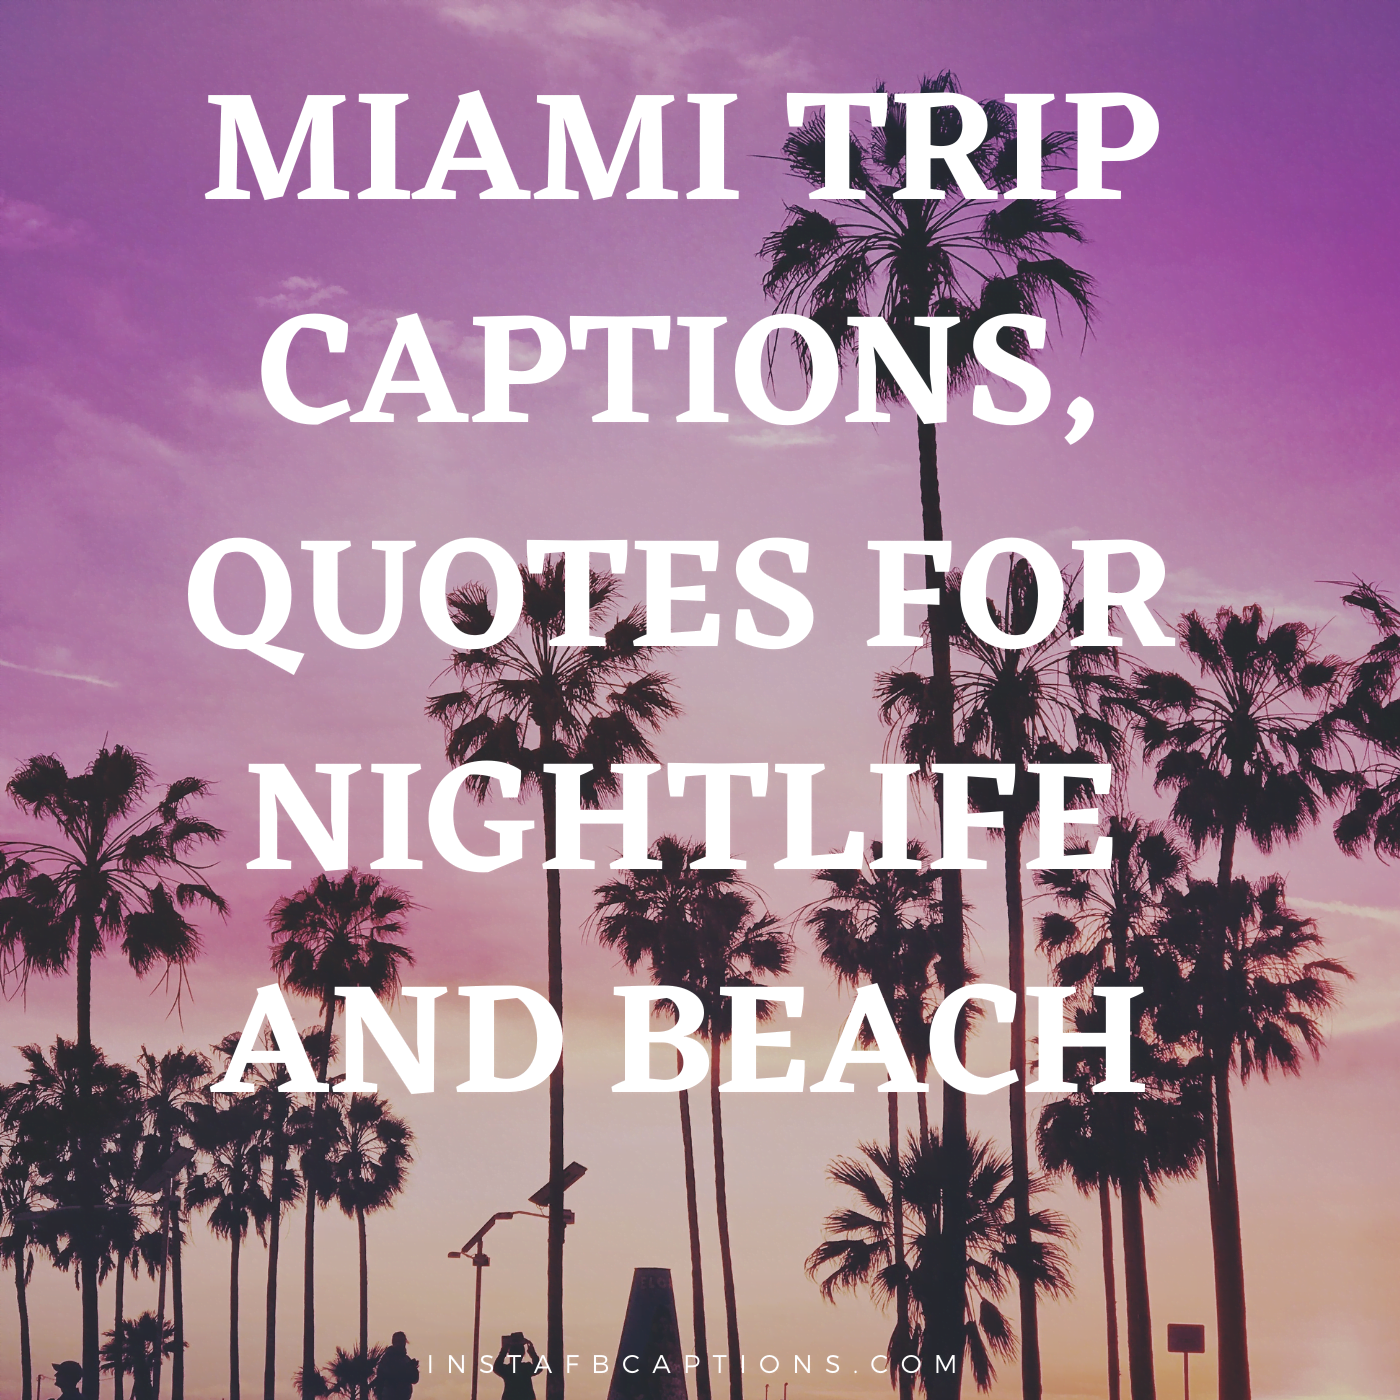 Miami Captions Quotes For Nightlife And Beach  - Miami Captions Quotes for Nightlife and Beach - 101 Miami Instagram Captions for Beach and Nightlife 2022